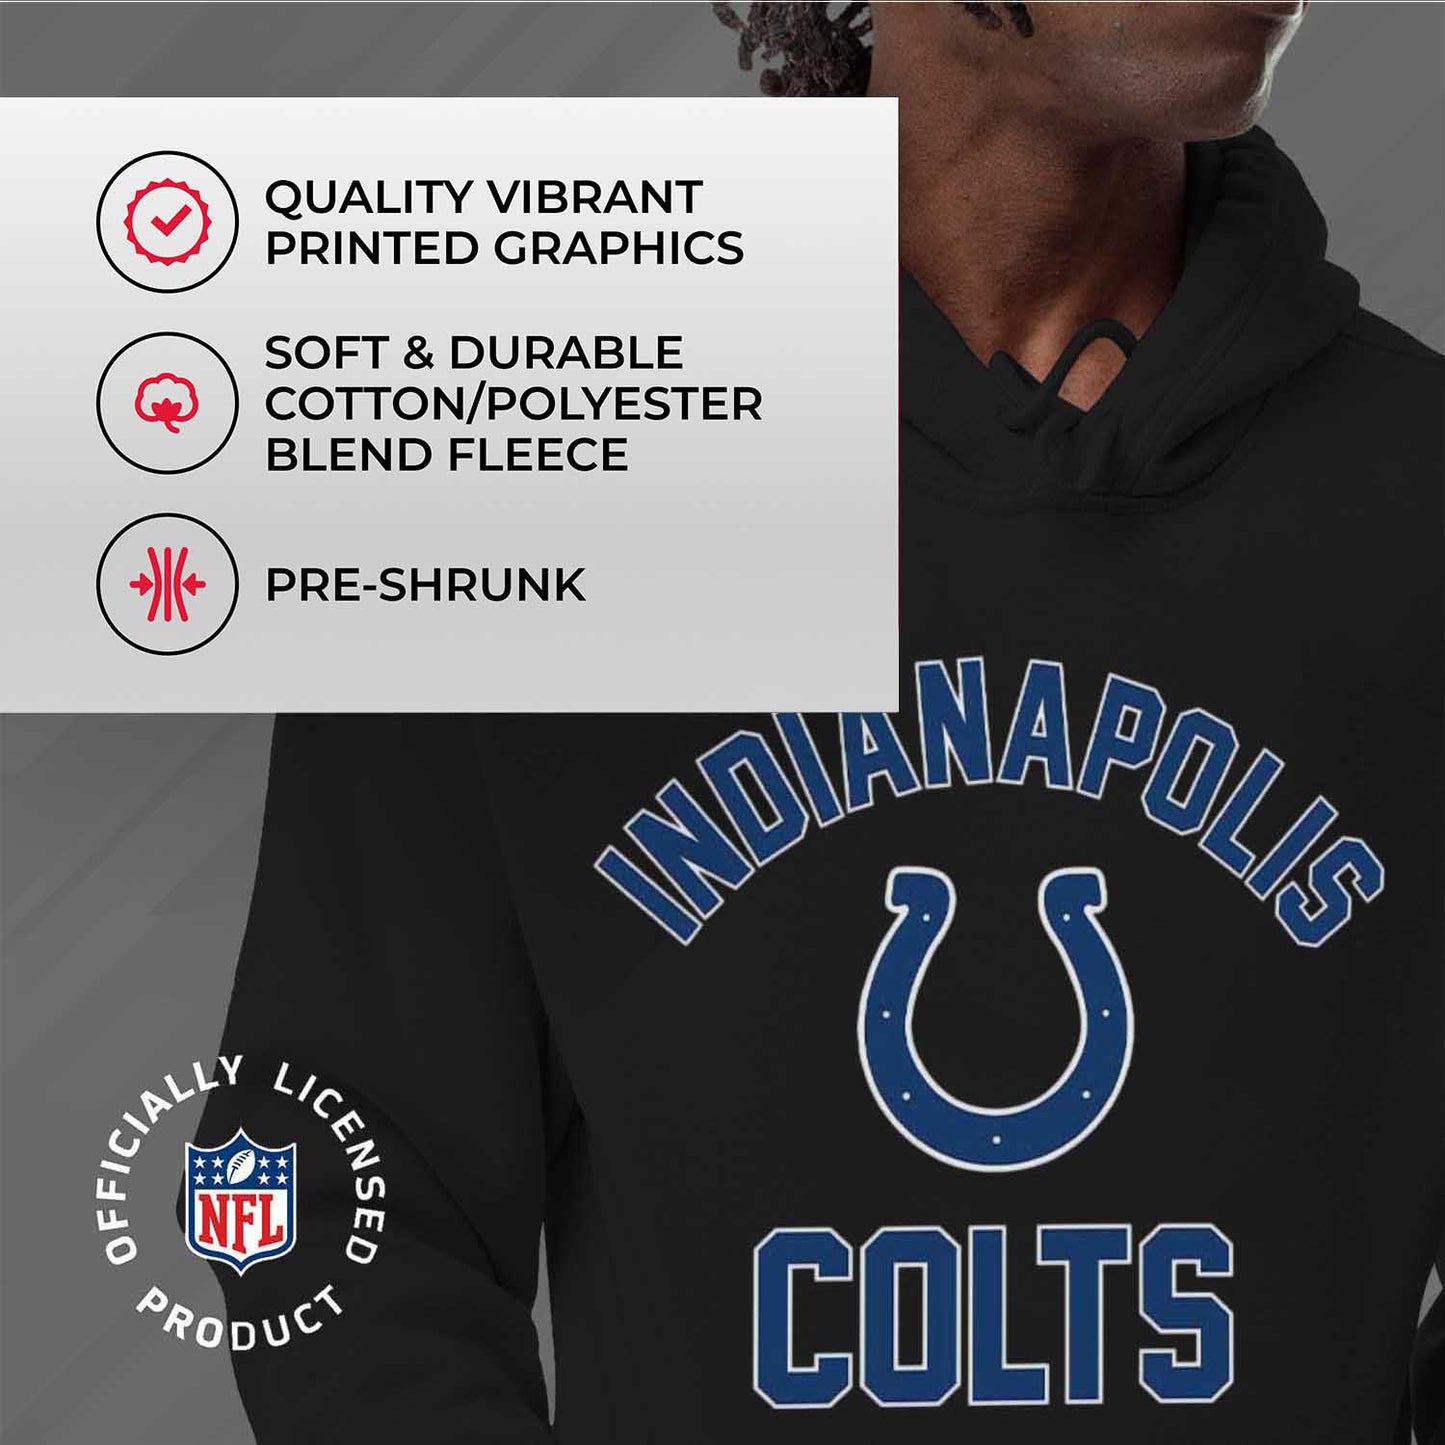 Indianapolis Colts NFL Adult Gameday Hooded Sweatshirt - Black